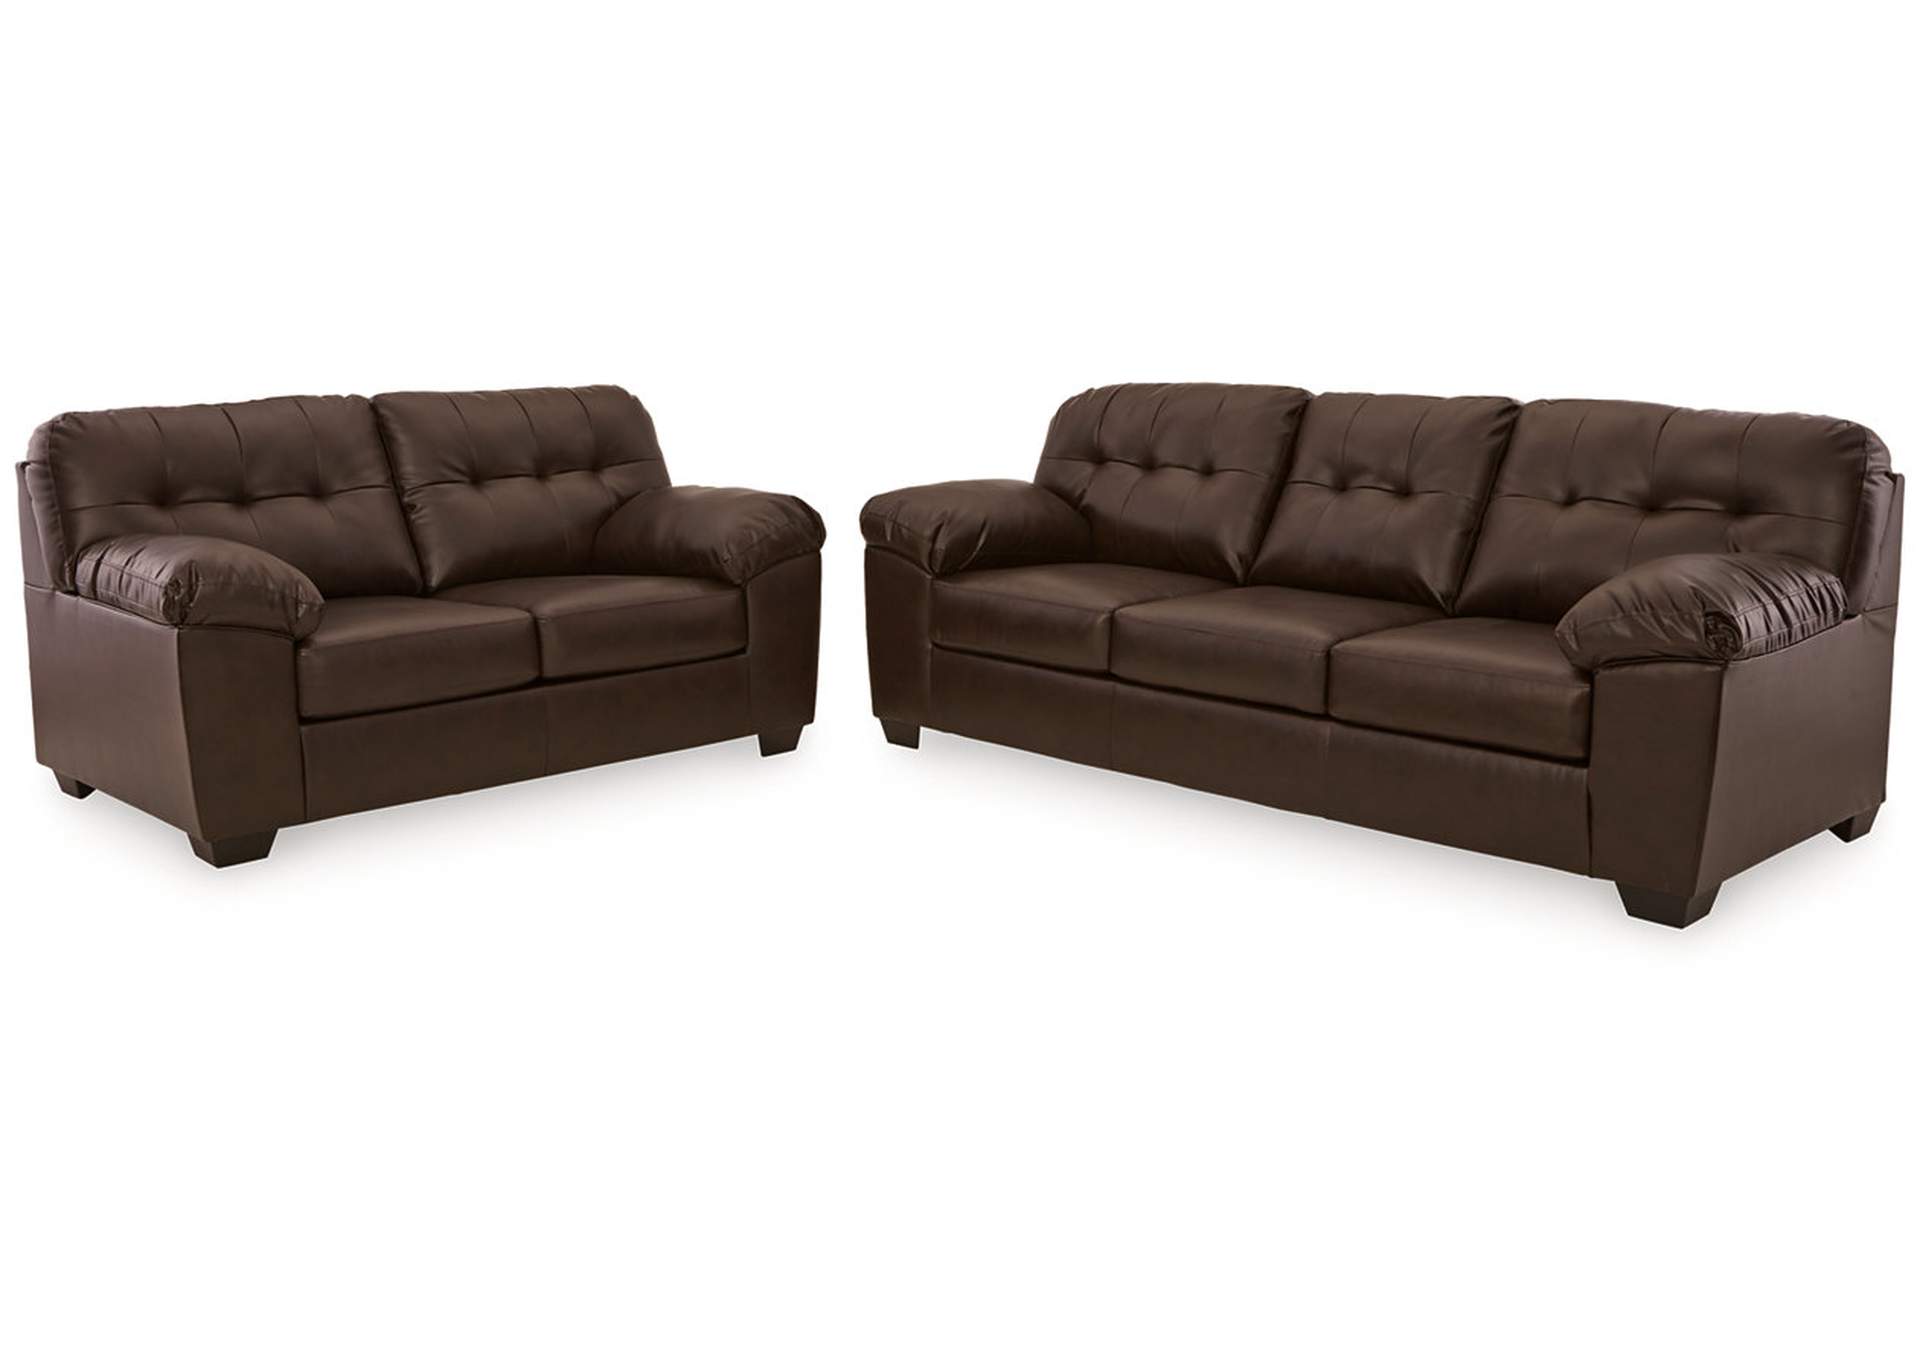 Donlen Sofa and Loveseat,Signature Design By Ashley